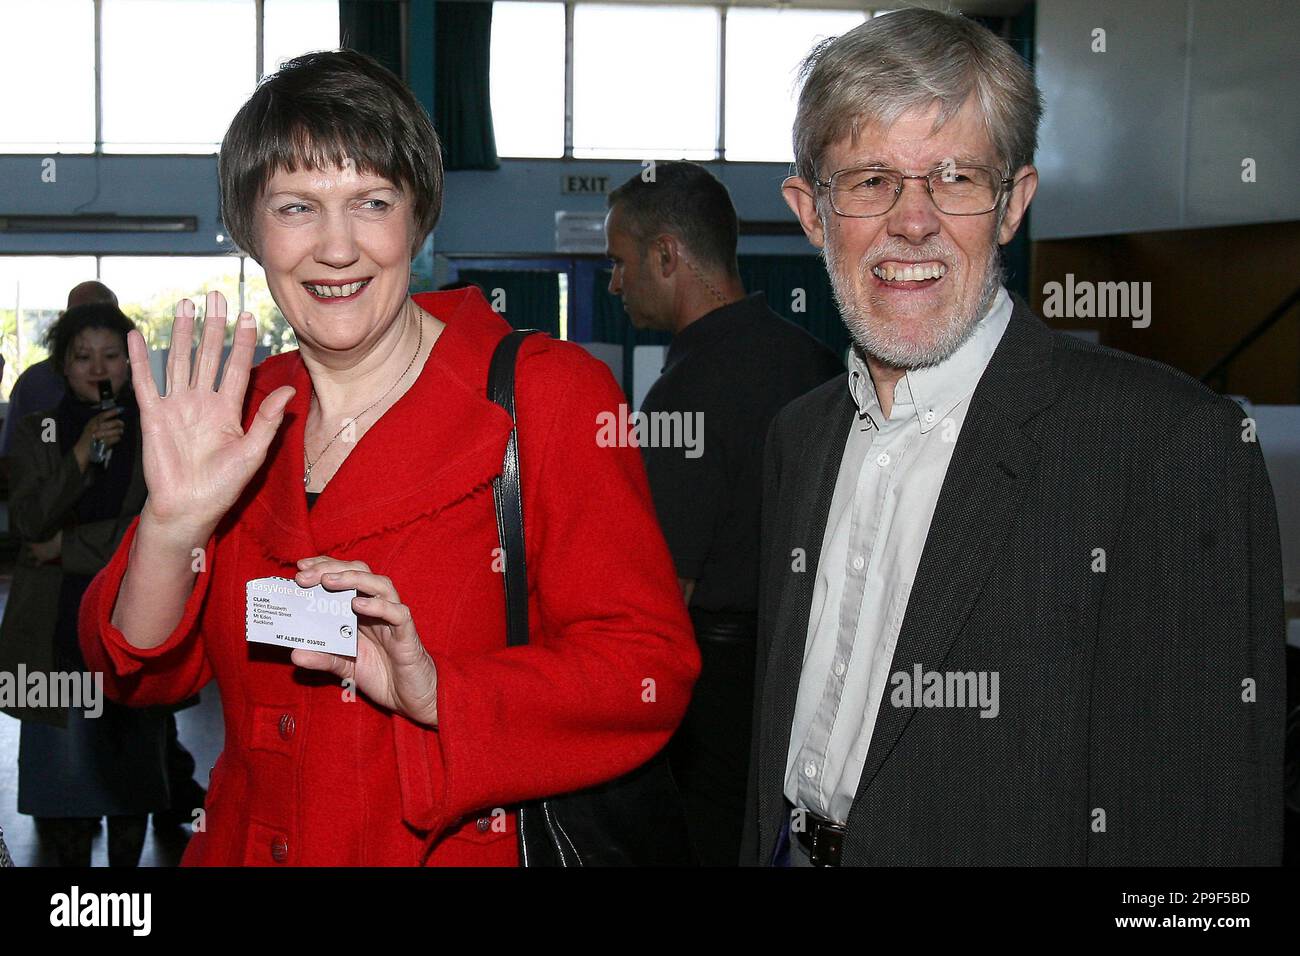 New Zealand's Labour Party leader Helen Clark and husband Peter Davis line up to vote in the New Zealand general election at Kowhai Intermediate School, Auckland, New Zealand, Saturday, Nov. 8, 2008. The two major parties _ Prime Minister Helen Clark's Labour and conservative John Key's Nationals _ are almost certain not to gain a majority in the 123-seat Parliament in their own right. A complex proportional voting system ensures significant numbers of seats will go to a handful of small parties. (AP Photo/NZPA, Wayne Drought) ** NEW ZEALAND OUT ** Stock Photo